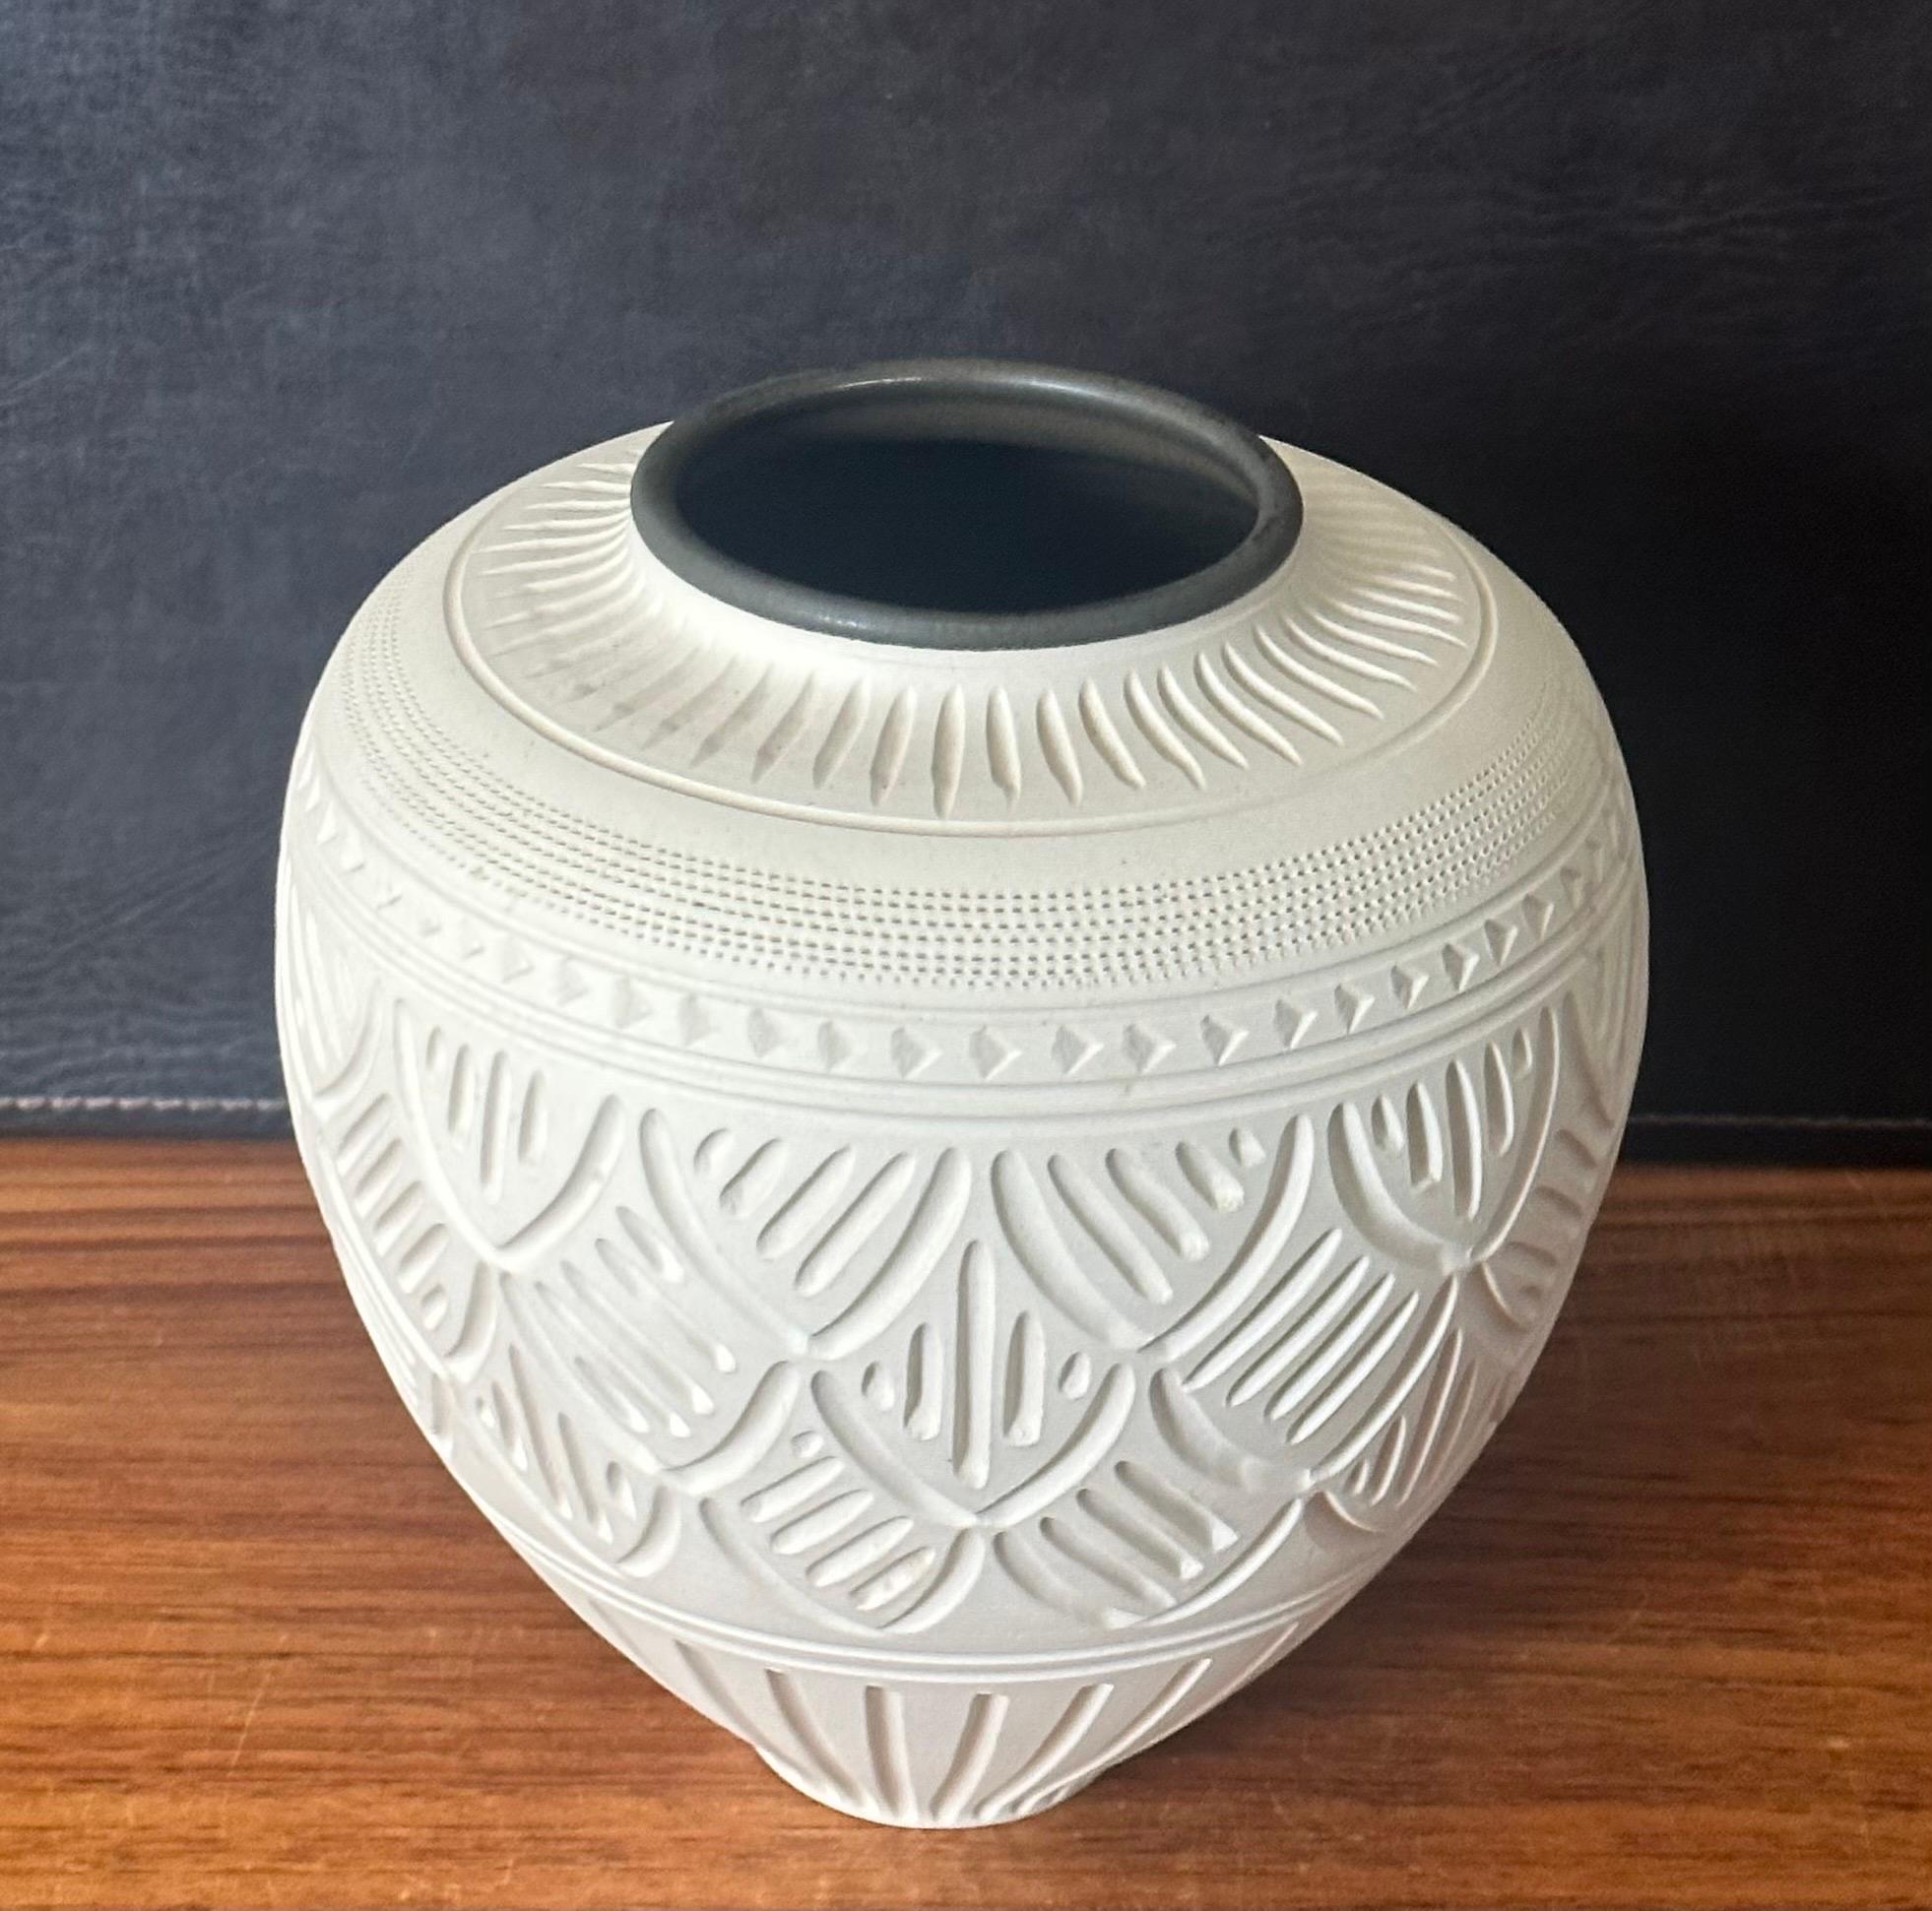 Incised Geometric Design Bisque Porcelain Vase by Nancy Smith In Good Condition For Sale In San Diego, CA